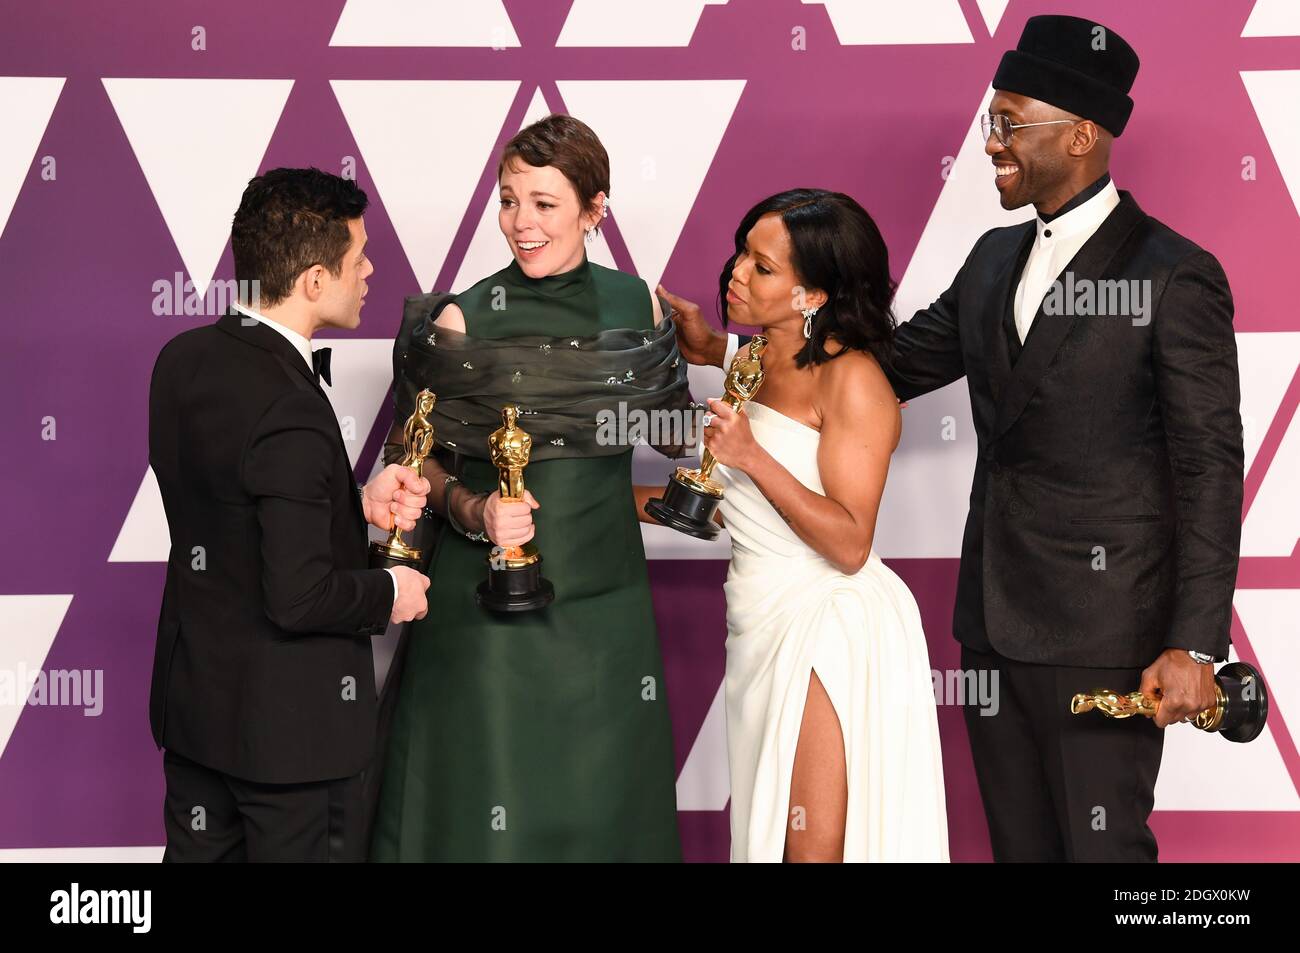 Rami Malek, winner of Best Actor for 'Bohemian Rhapsody'; Olivia Colman, winner of Best Actress for 'The Favourite'; Regina King, winner of Best Supporting Actress for 'If Beale Street Could Talk'; and Mahershala Ali, winner of Best Supporting Actor for 'Green Book' in the press room at the 91st Academy Awards held at the Dolby Theatre in Hollywood, Los Angeles, USA. Photo credit should read: Doug Peters/EMPICS. Stock Photo